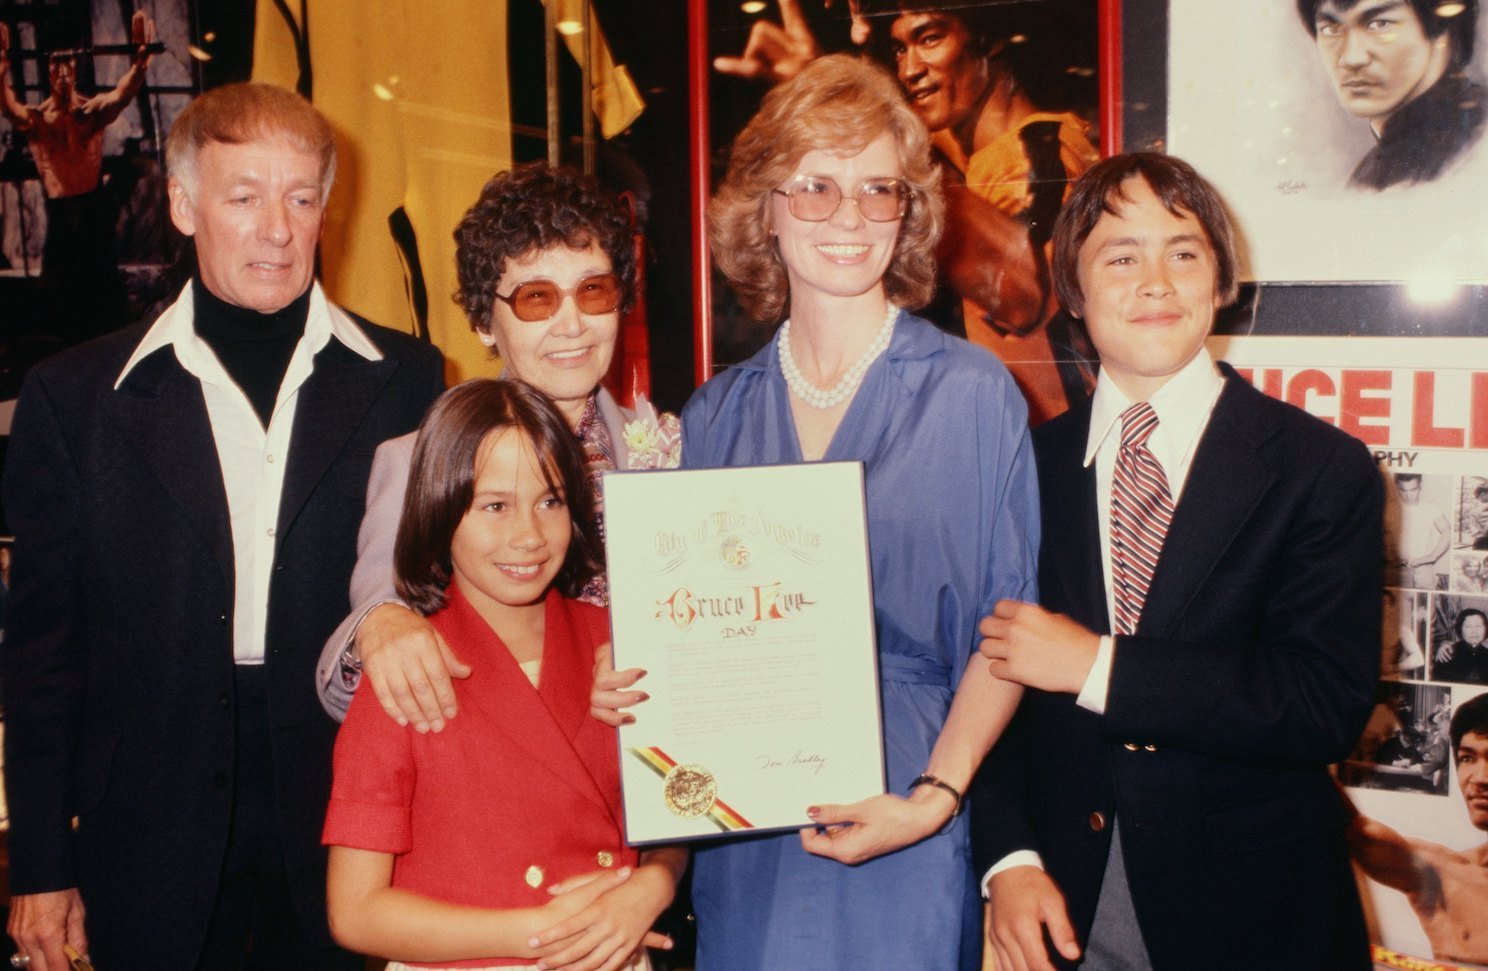 Bruce Lee's mother, wife Linda, and children Brandon Lee and Shannon Lee celebrate Bruce Lee Day circa 1979